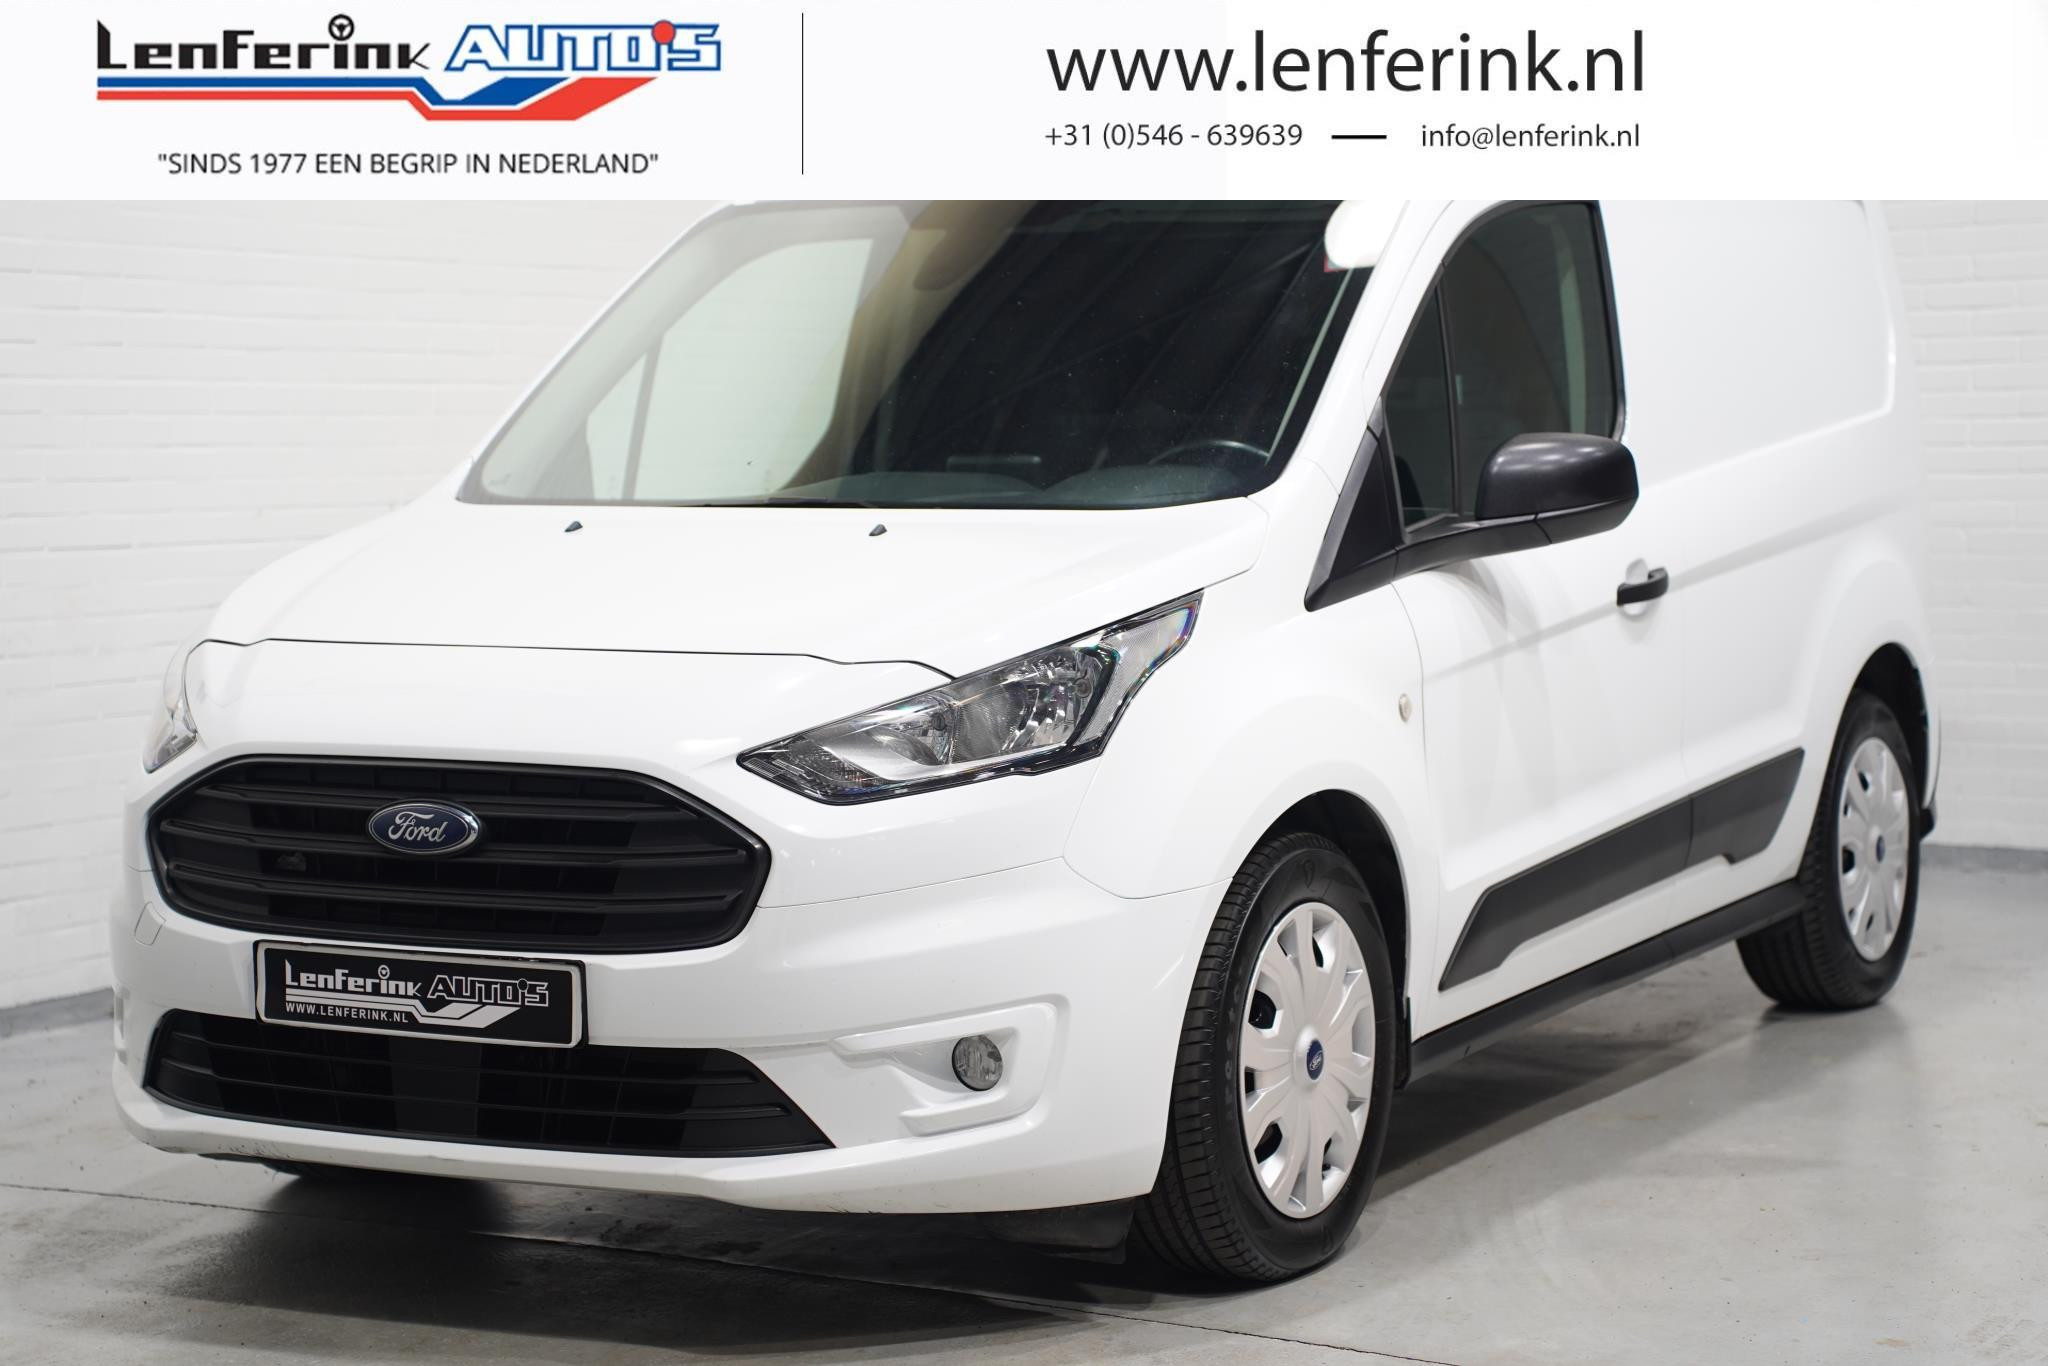 Ford Transit Connect 1.5 TDCi 100 pk L1 Automaat Navi, Camera Airco, Cruise Control, PDC achter, 3-Zits